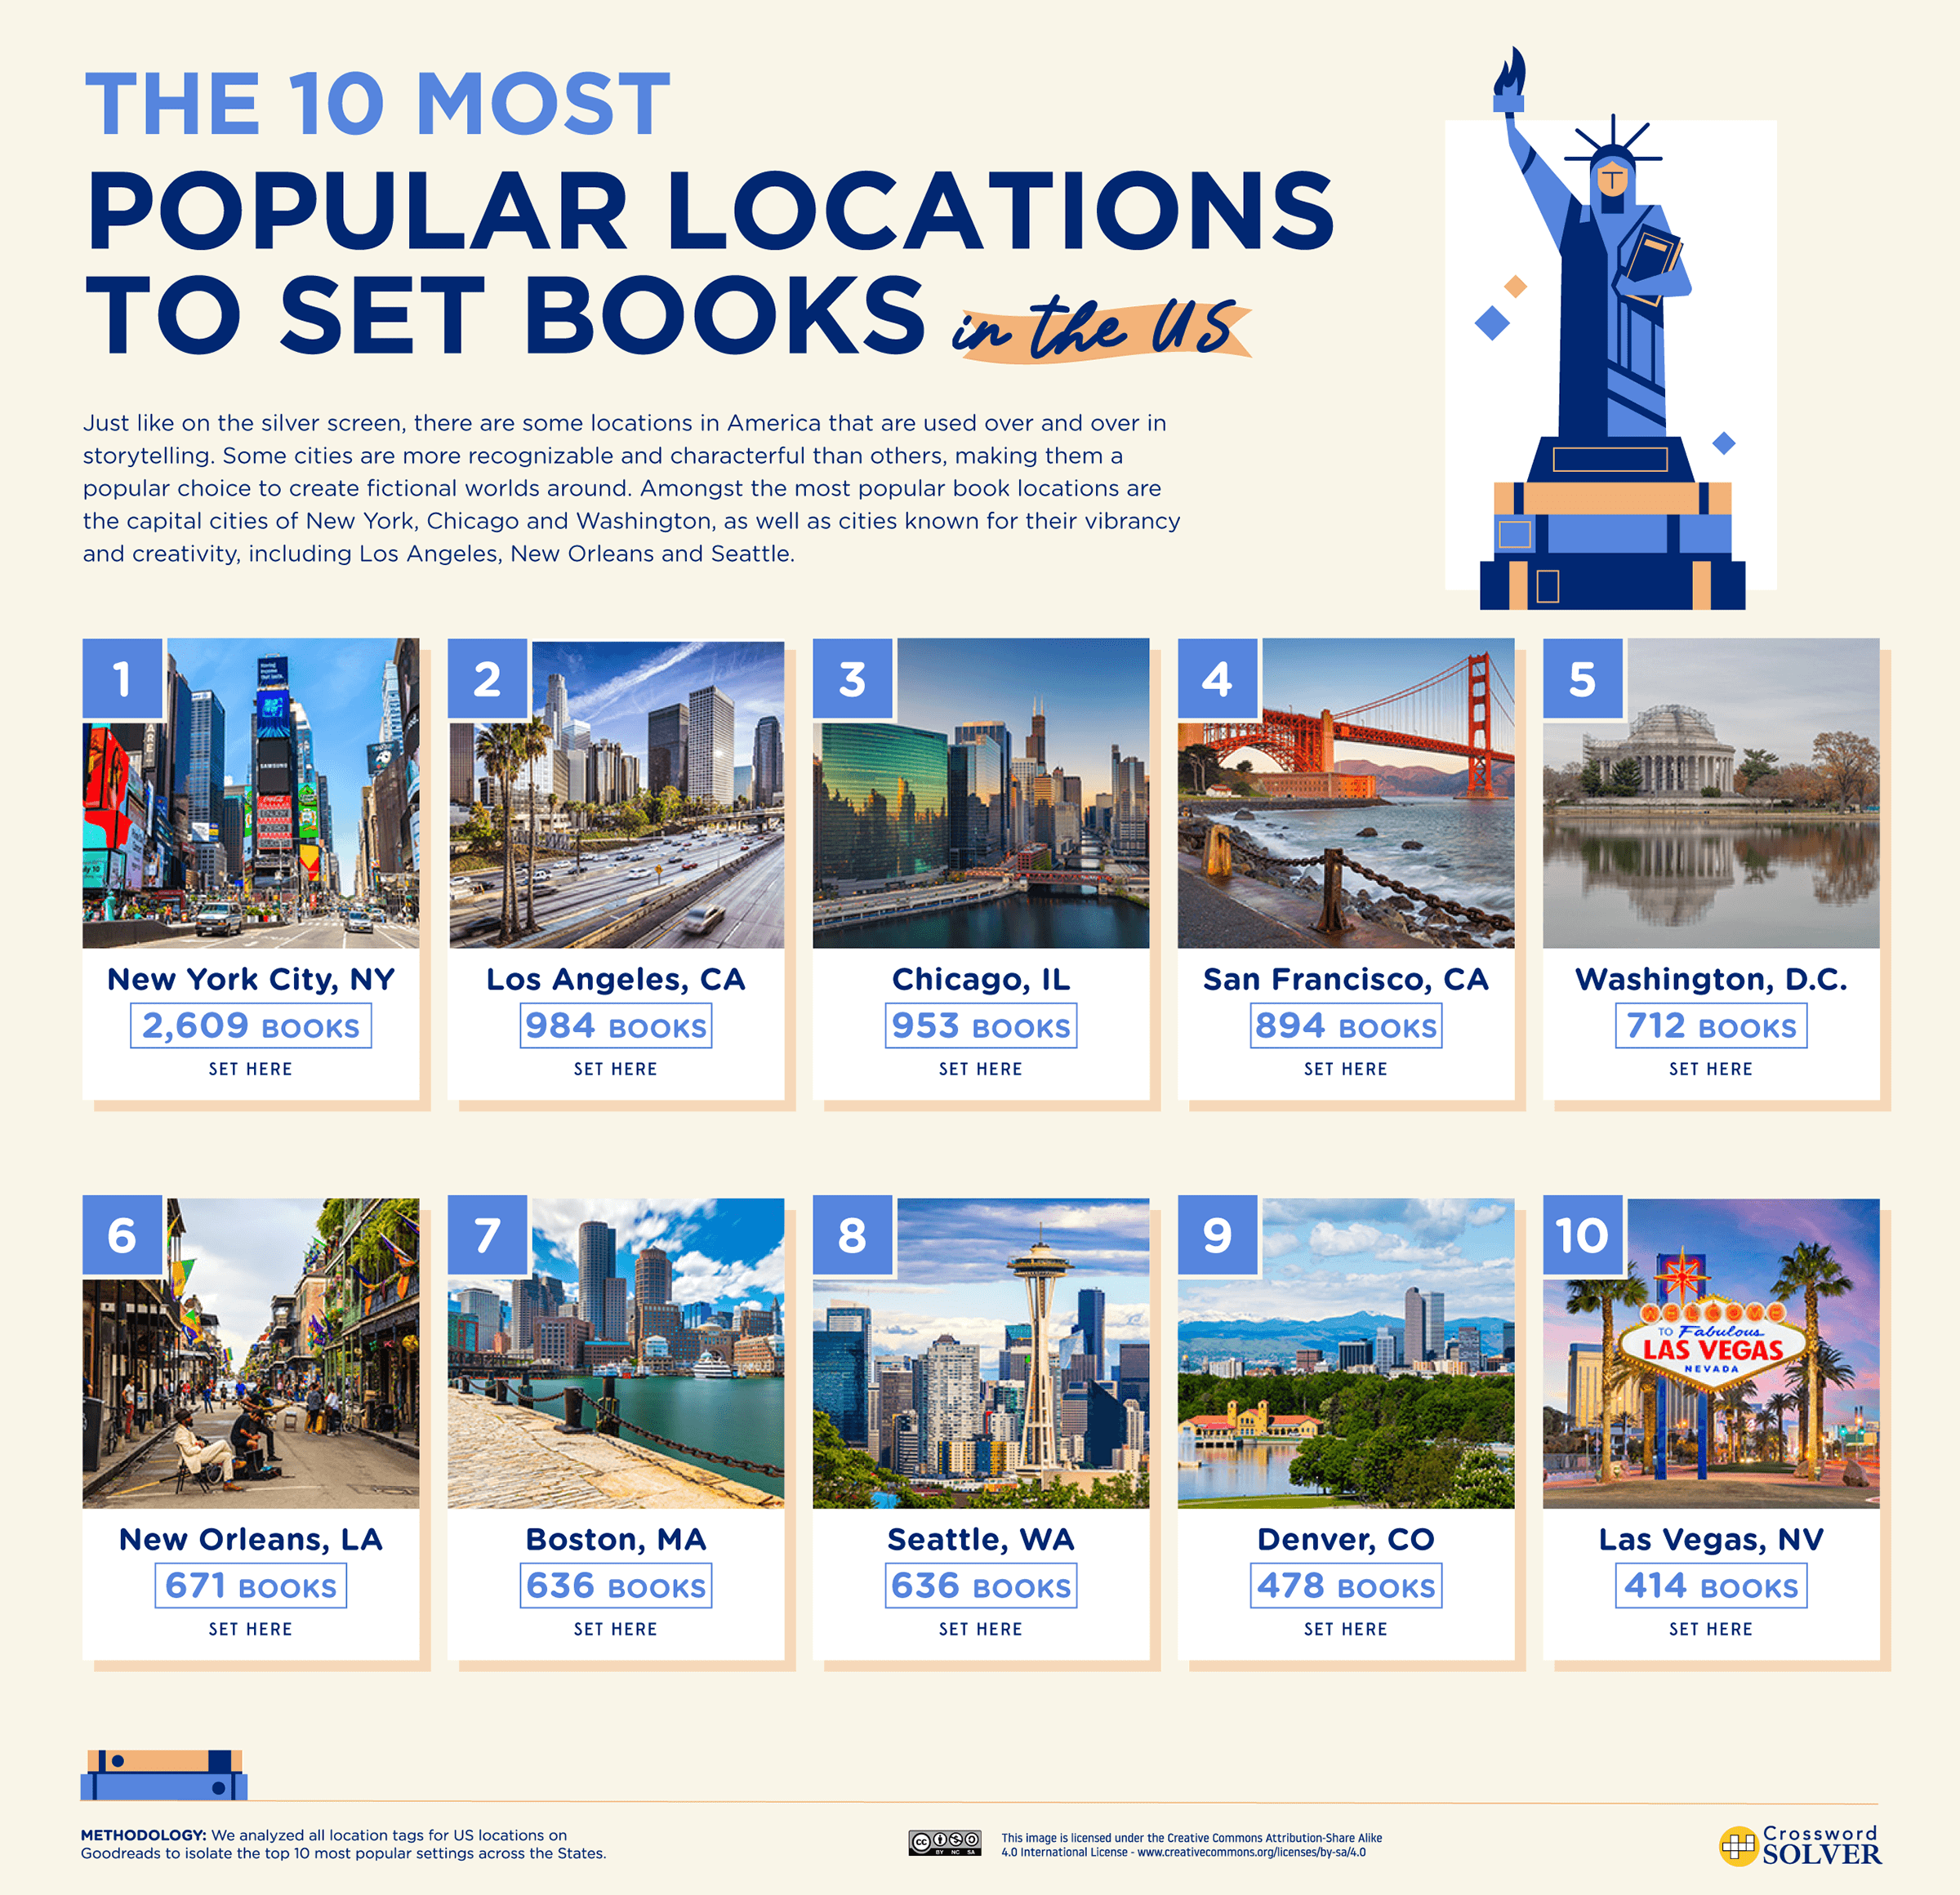 a graphic showing the top 10 locations to set books with photos of each city